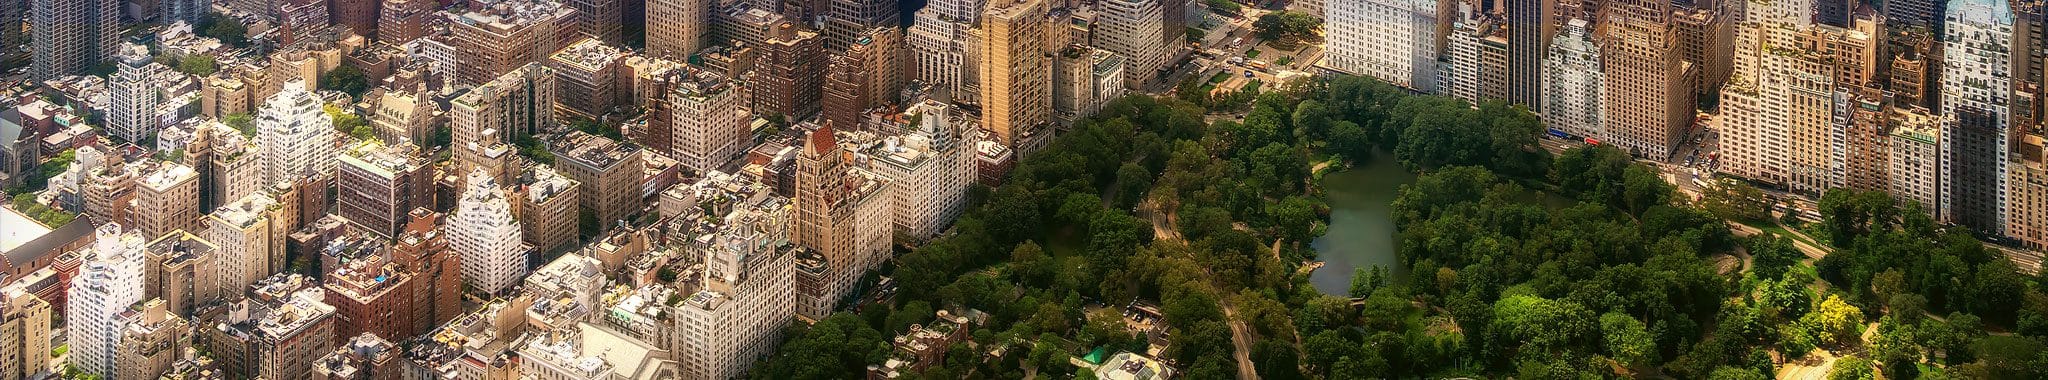 image showing an arial view of the Hunter College main campus on 68th Street and Lexington Ave. in Manhattan, New York City